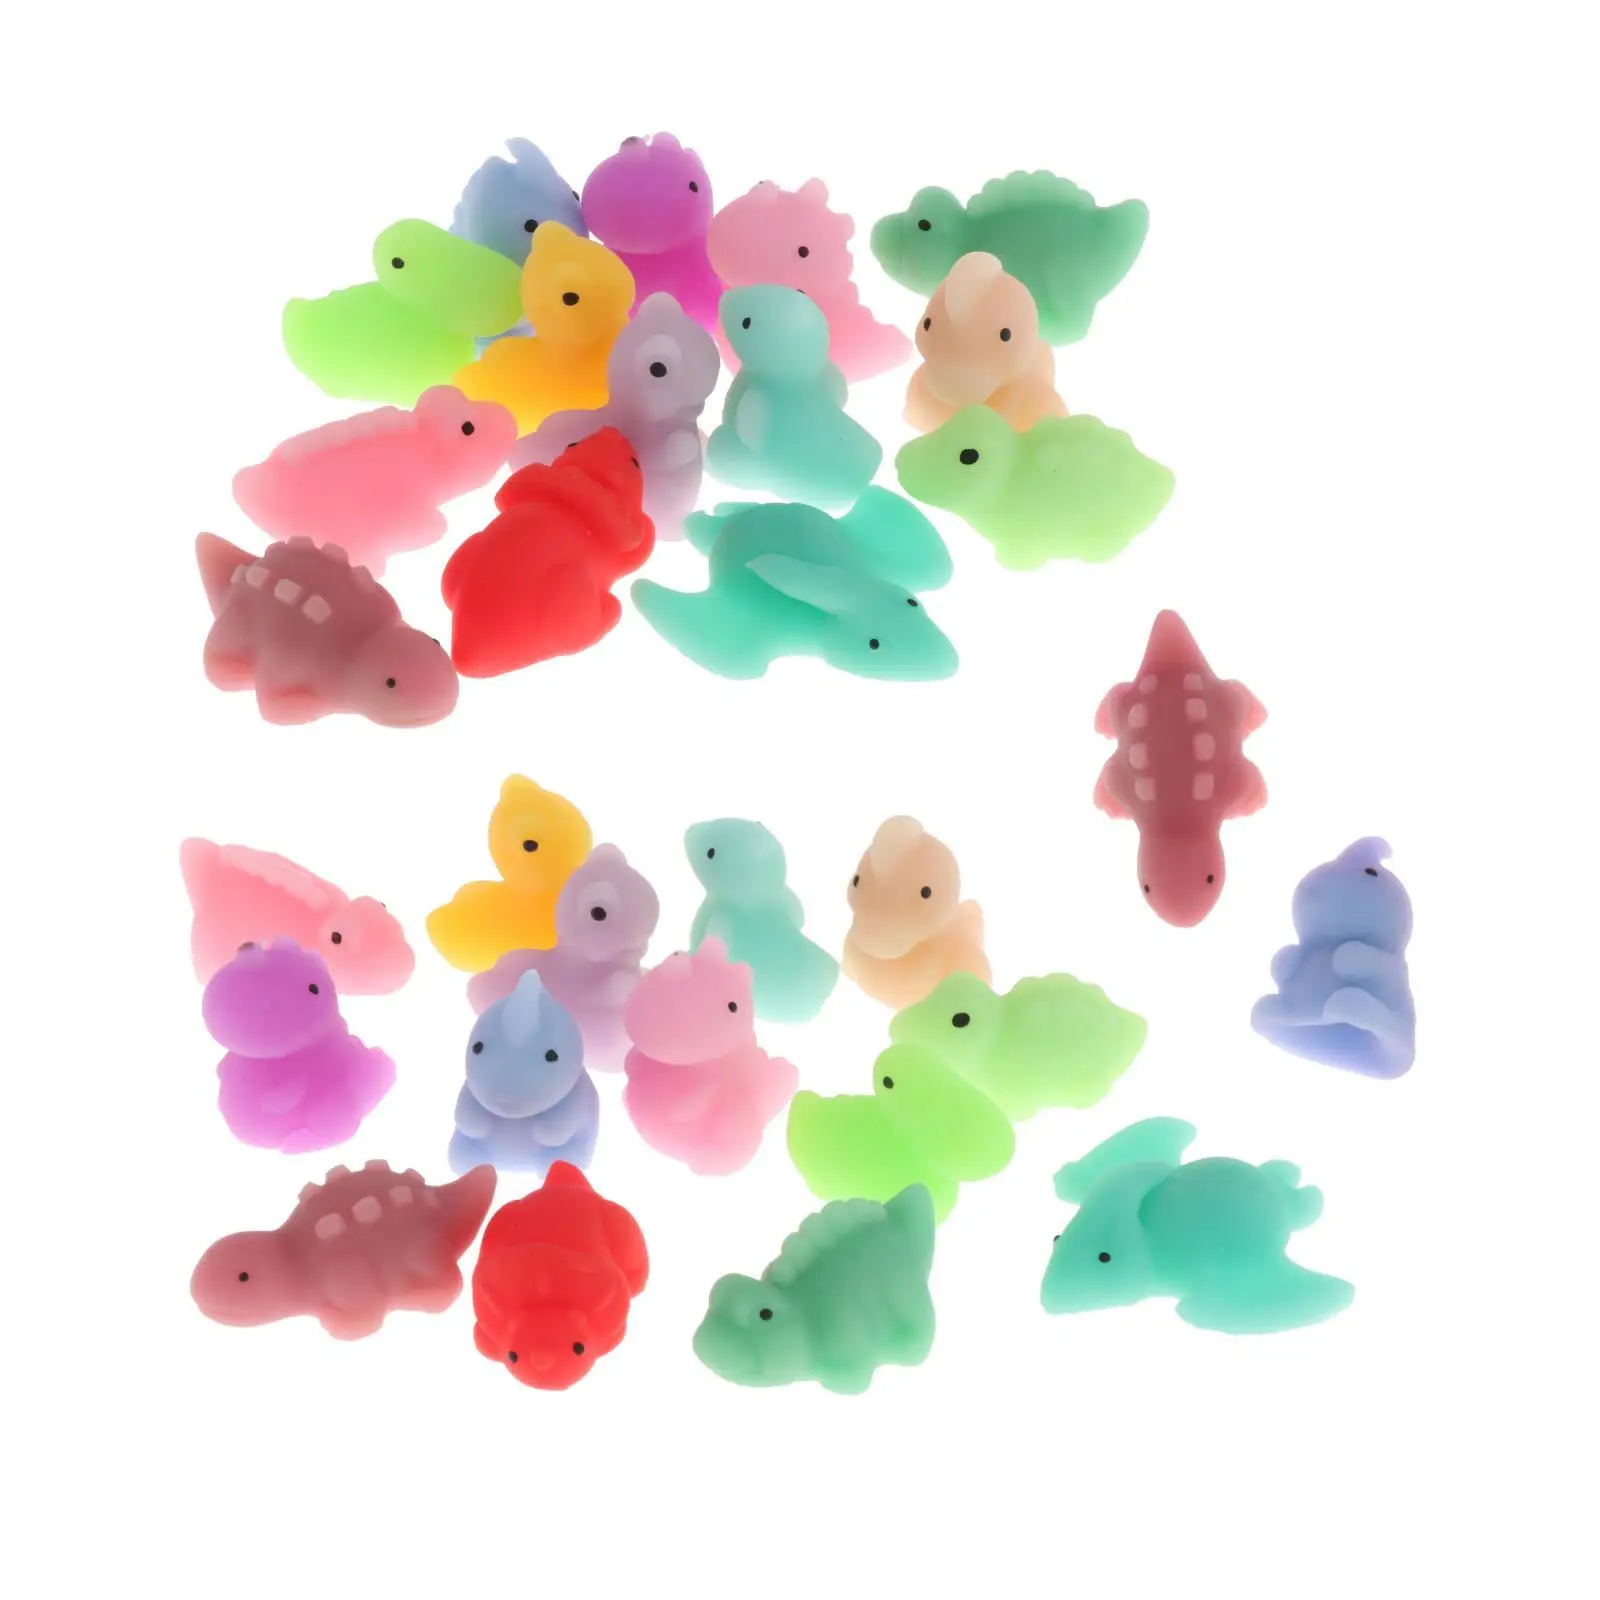 30 Pieces Mini Squeezing Toys Cute Relaxing Toy for Stocking Stuffers Adults